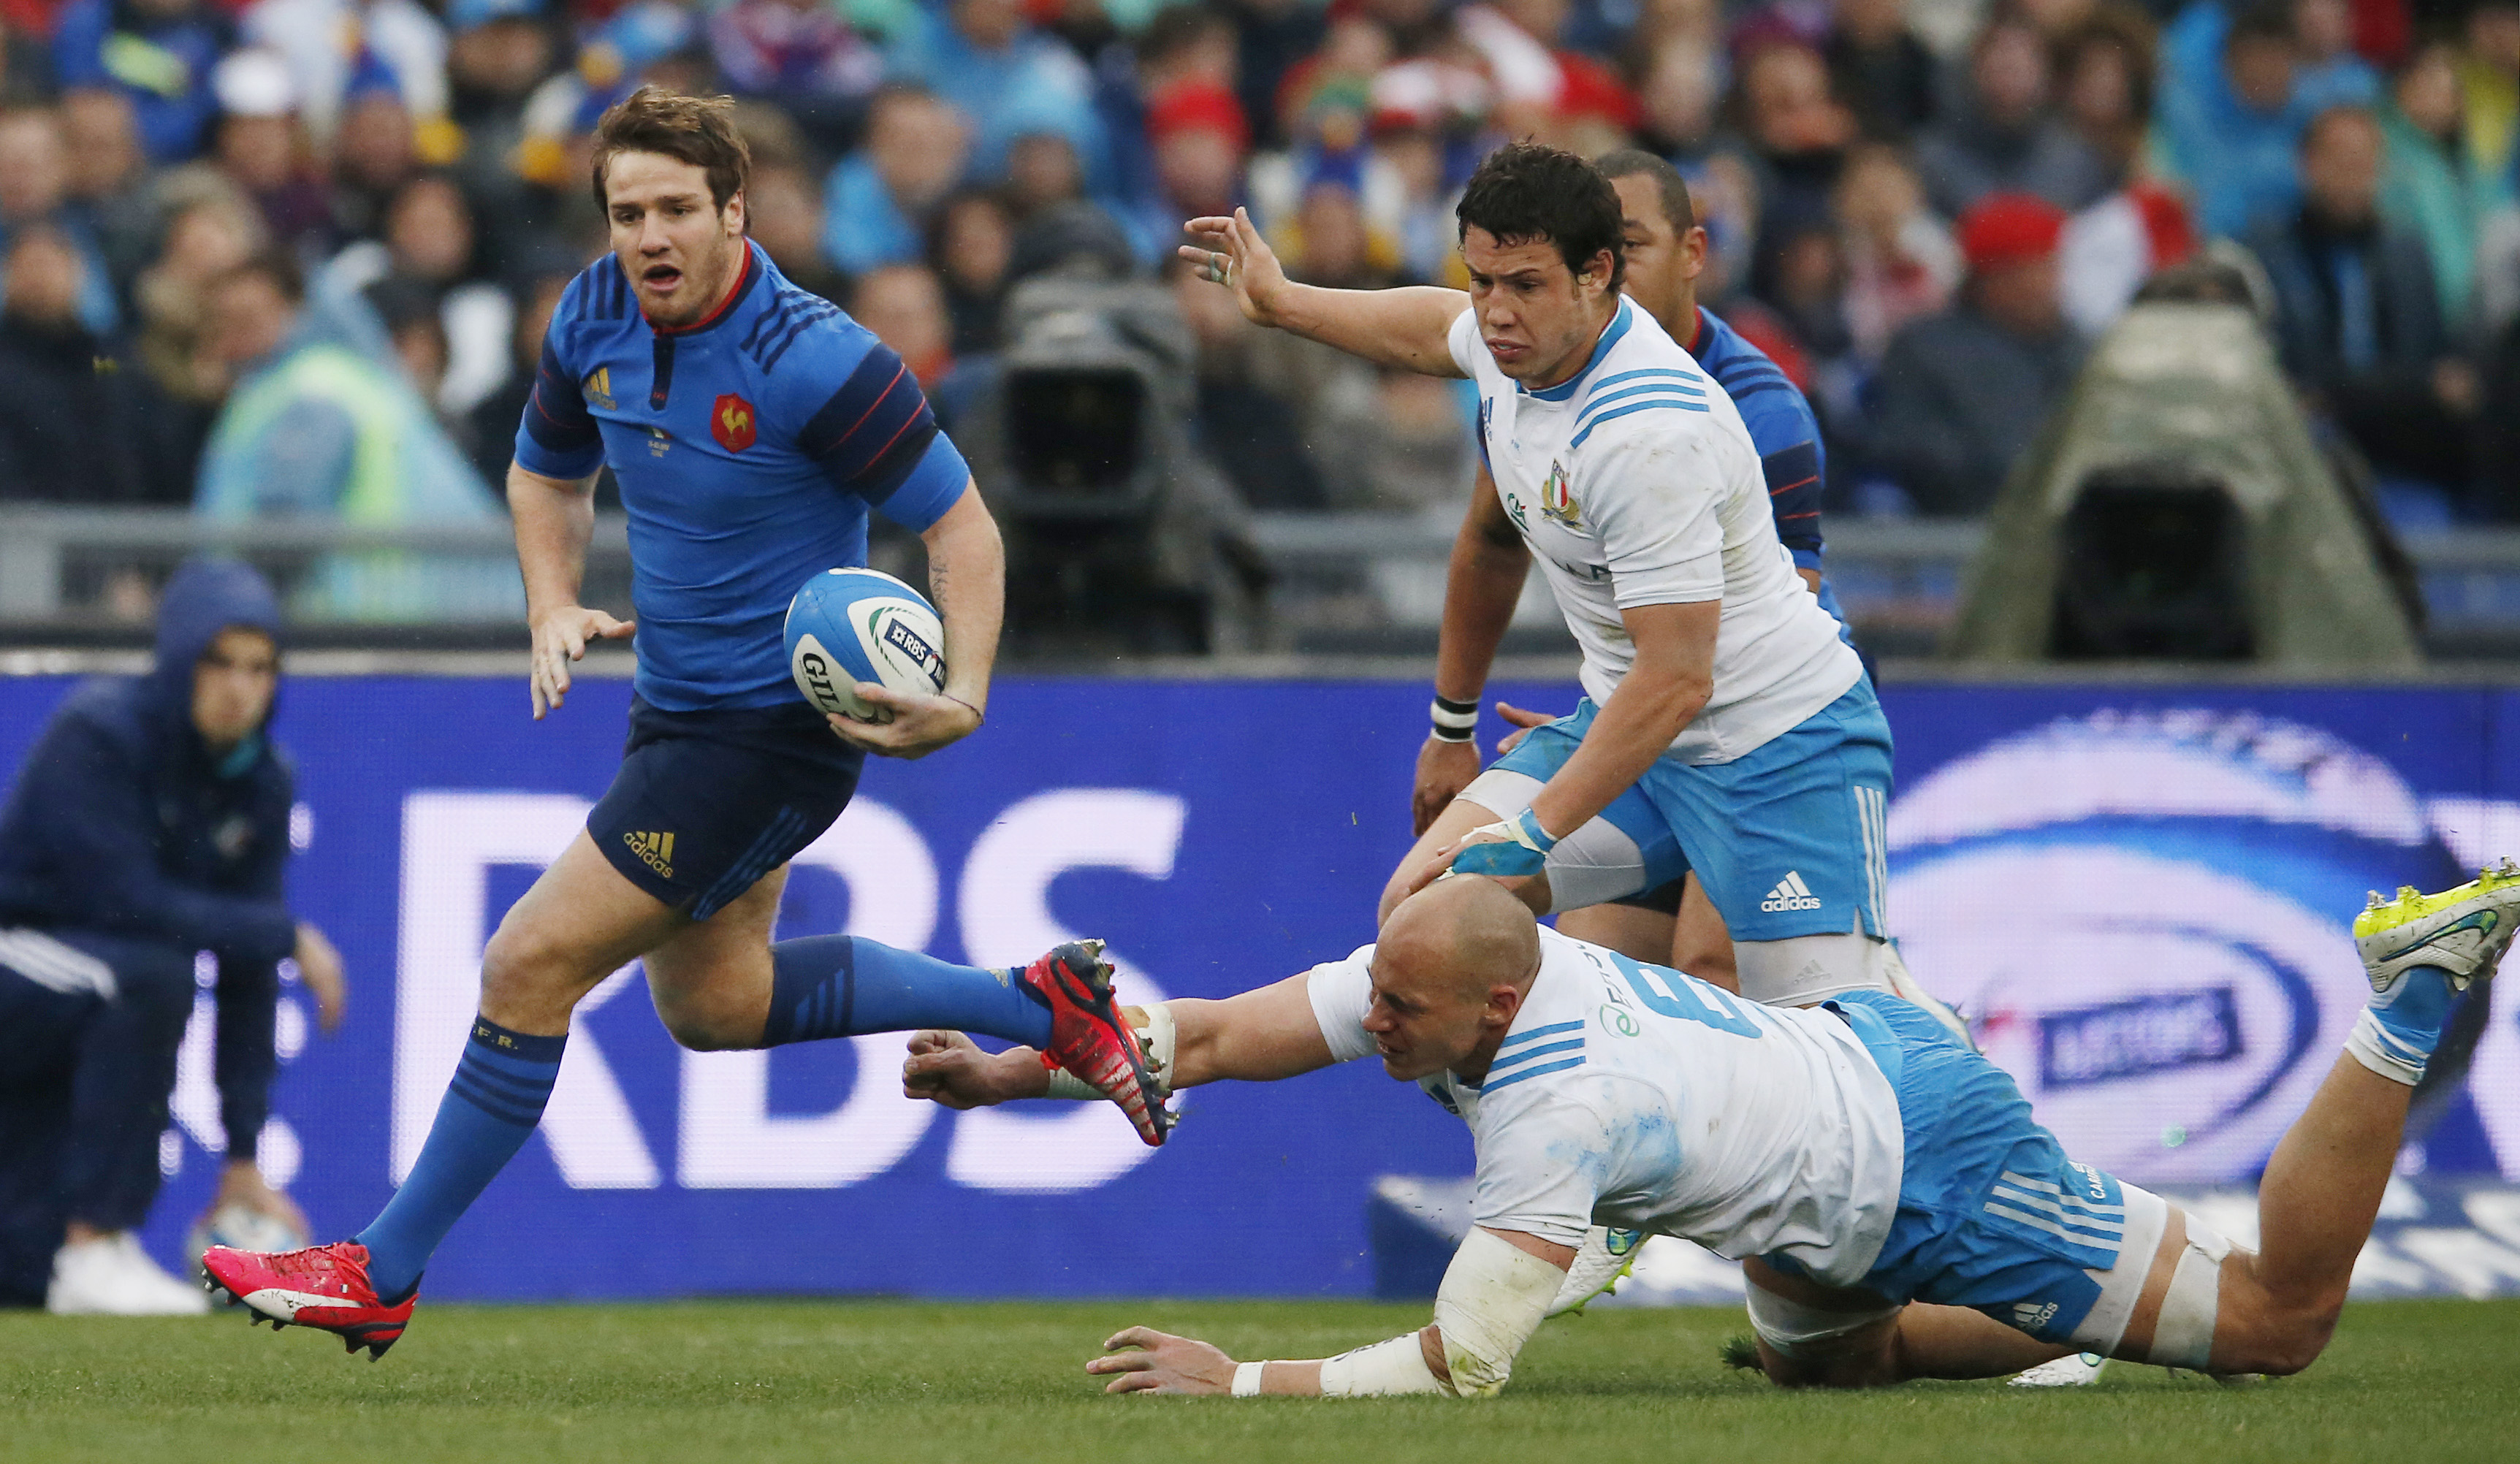 France's Camille Lopez heads for the try line with Italy's Sergio Parisse and Luca Morisi in pursuit. Photo: Reuters
